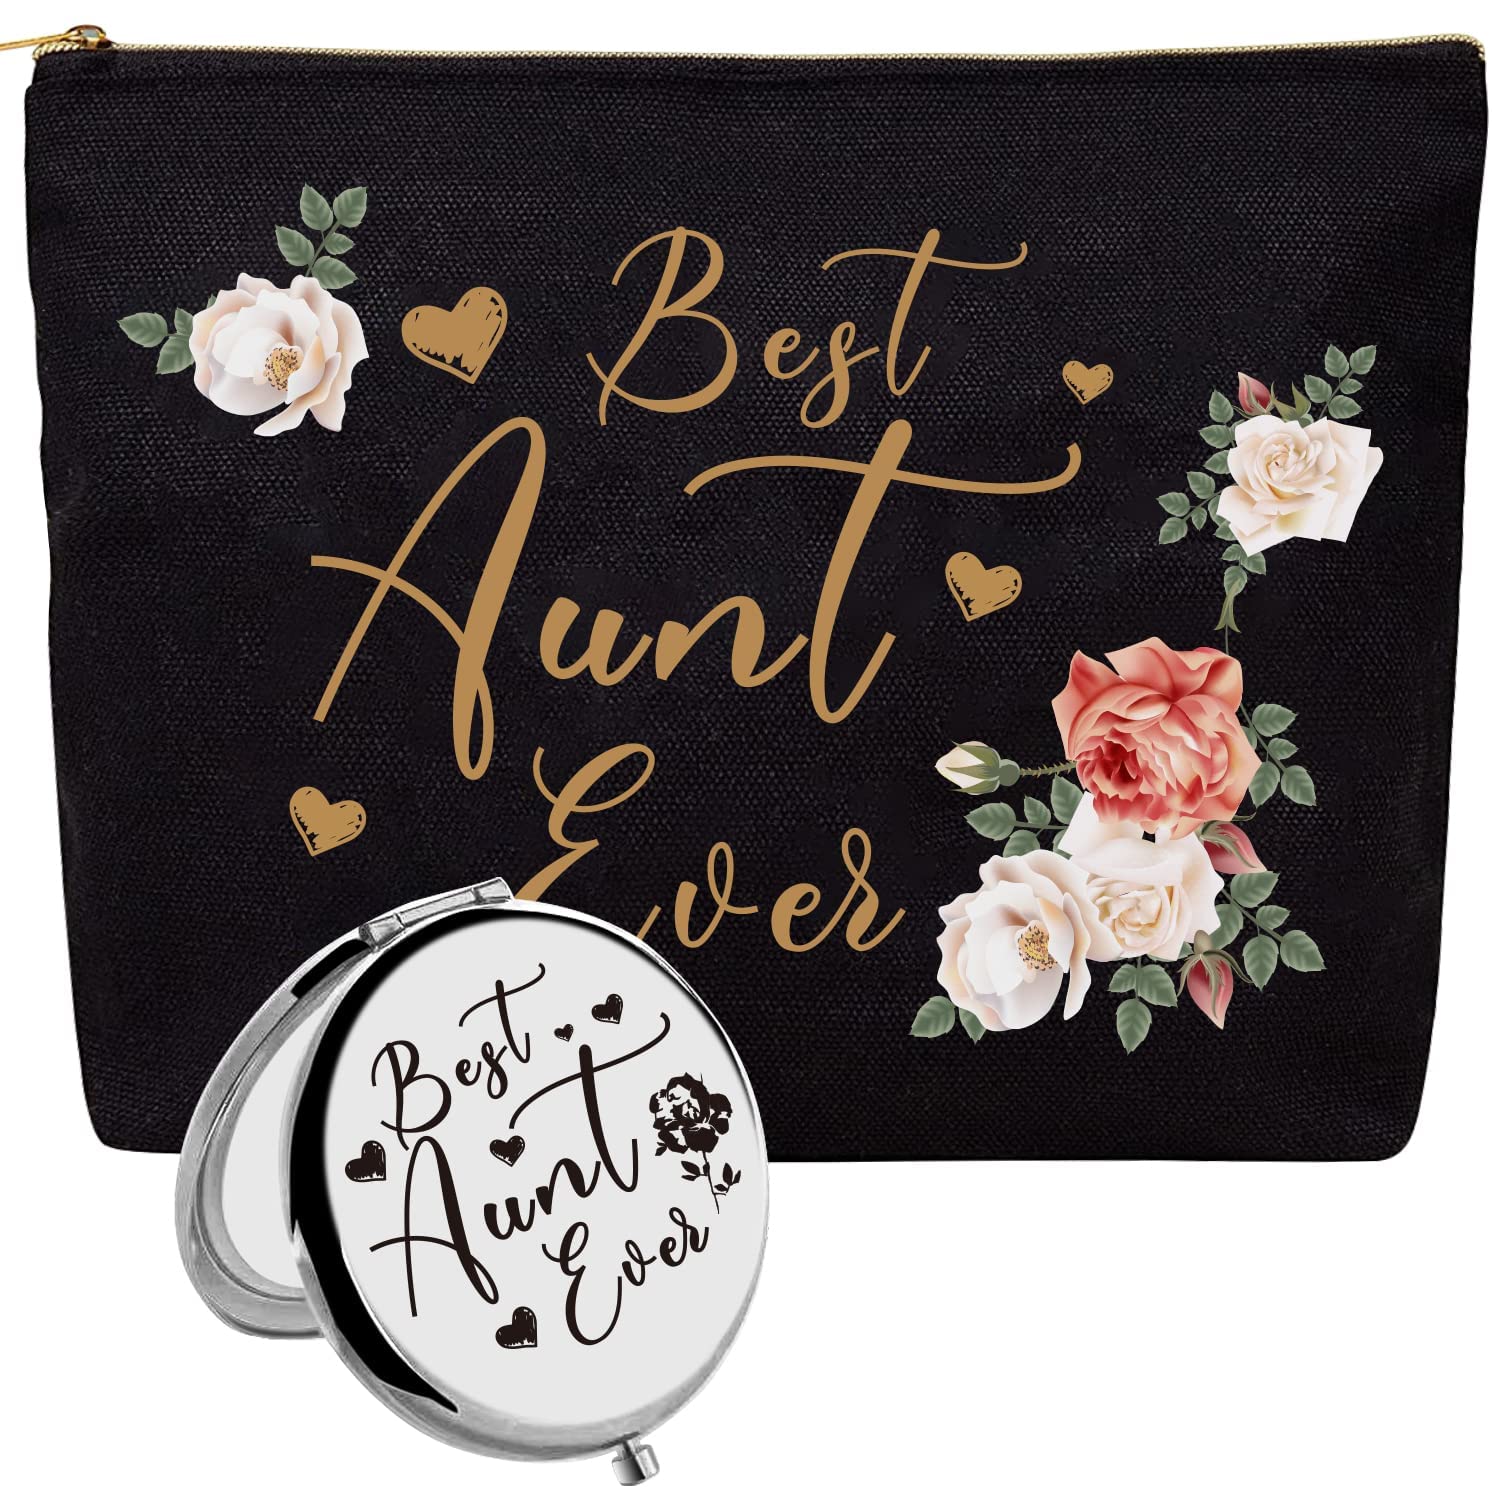 Thoughtful Gifts For Your Aunt and Auntie – Liliana and Liam